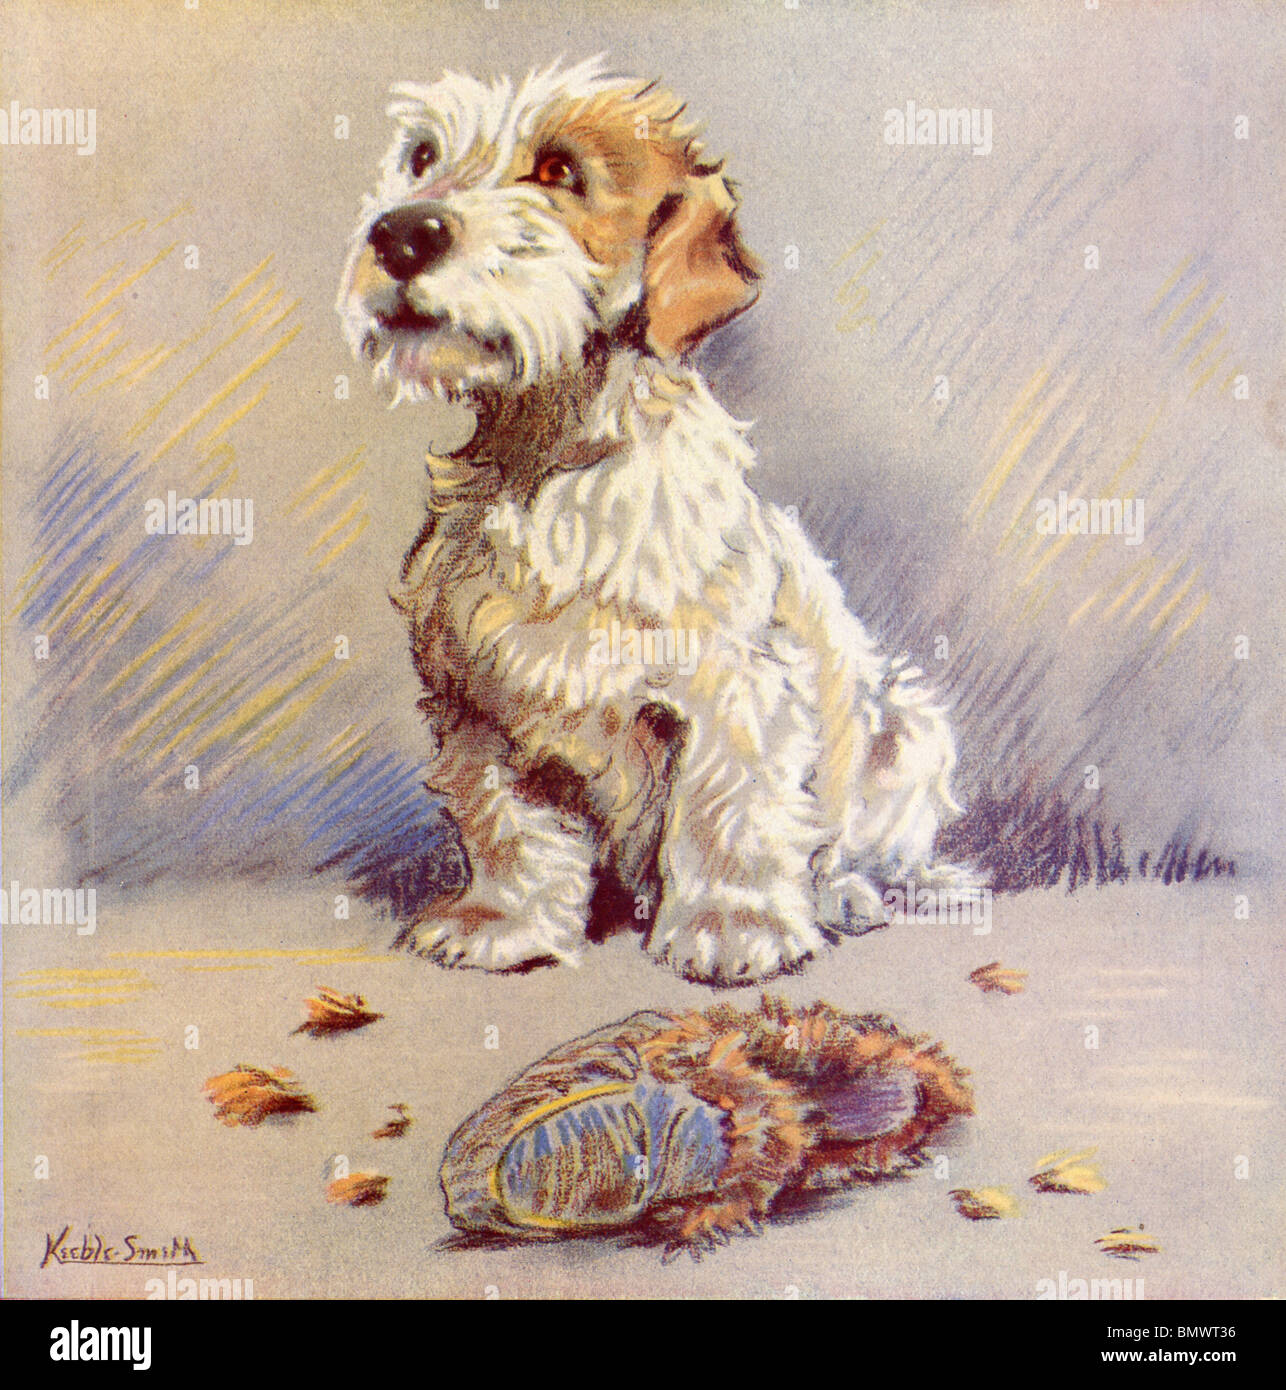 The Little White Dog with large Brown Eyes Stock Photo